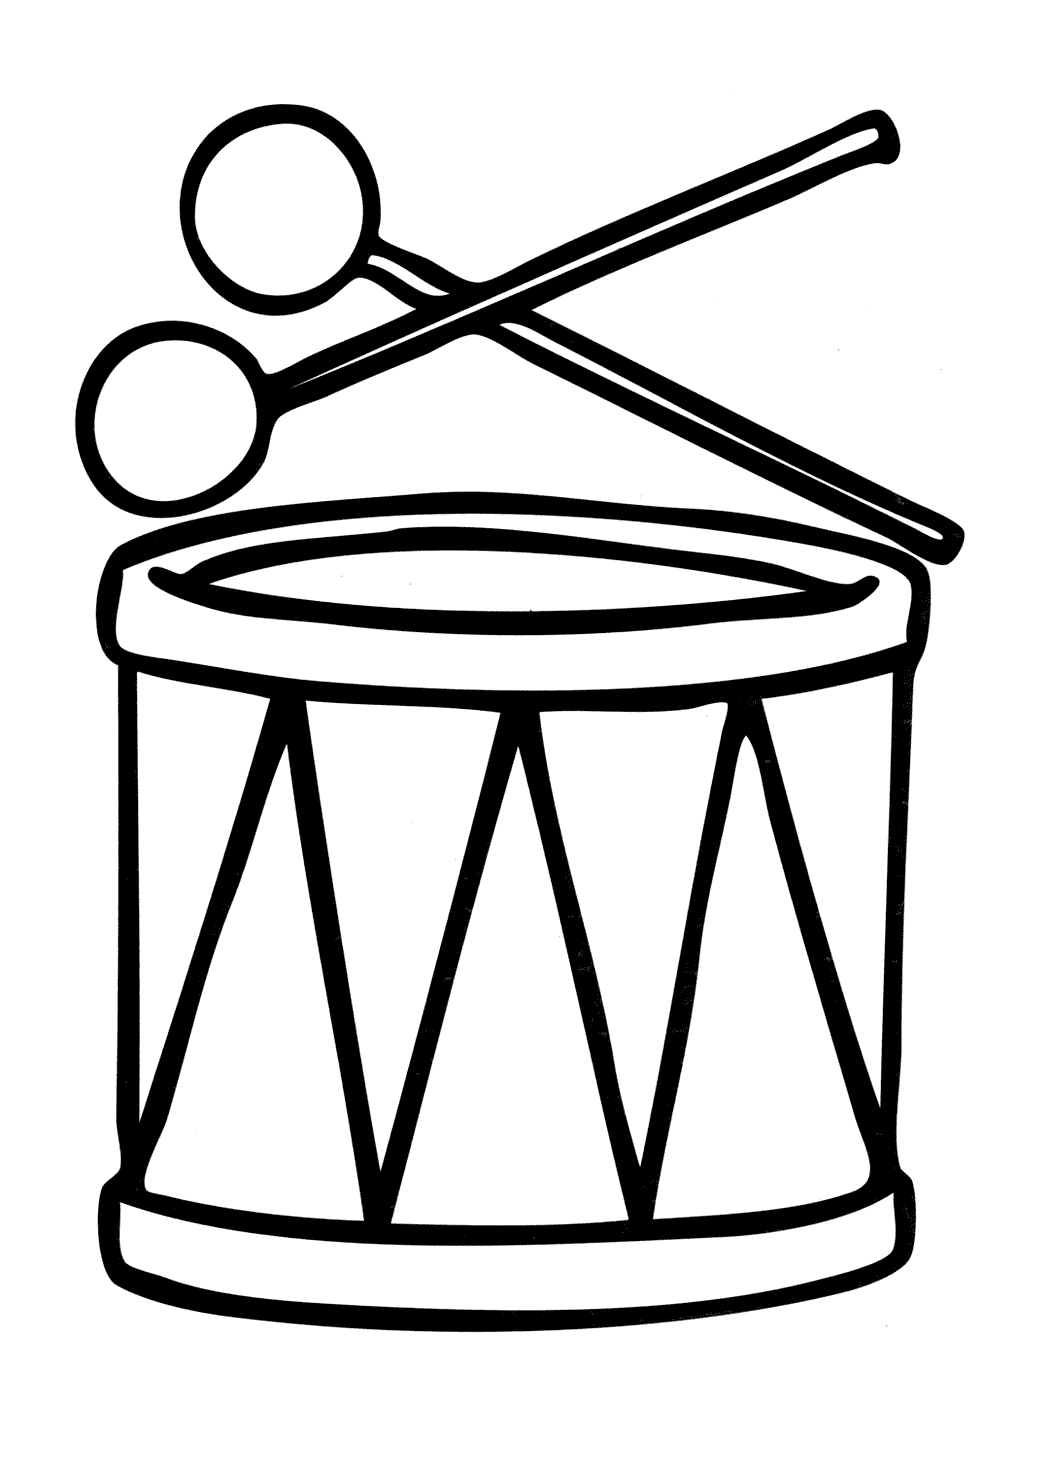 Drum coloring pages to download and print for free